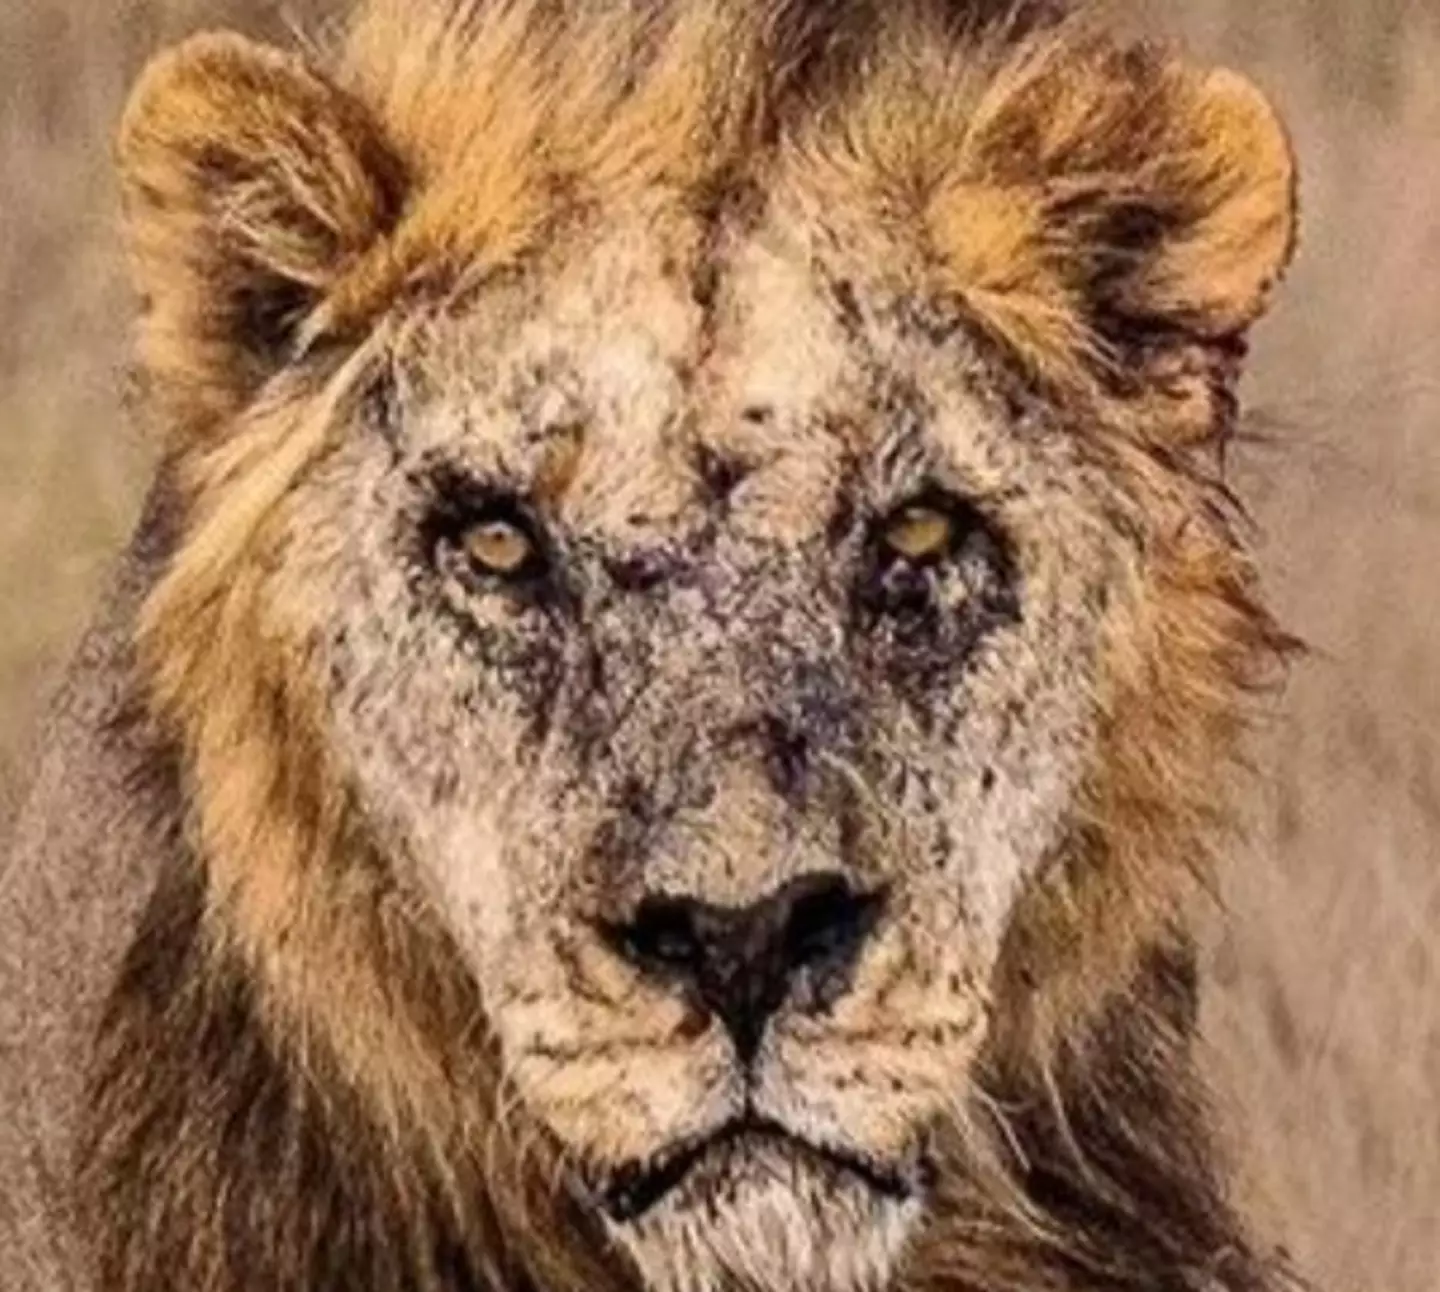 Loonkito, thought to be the oldest lion in the wild, was speared to death after attacking a village's livestock.